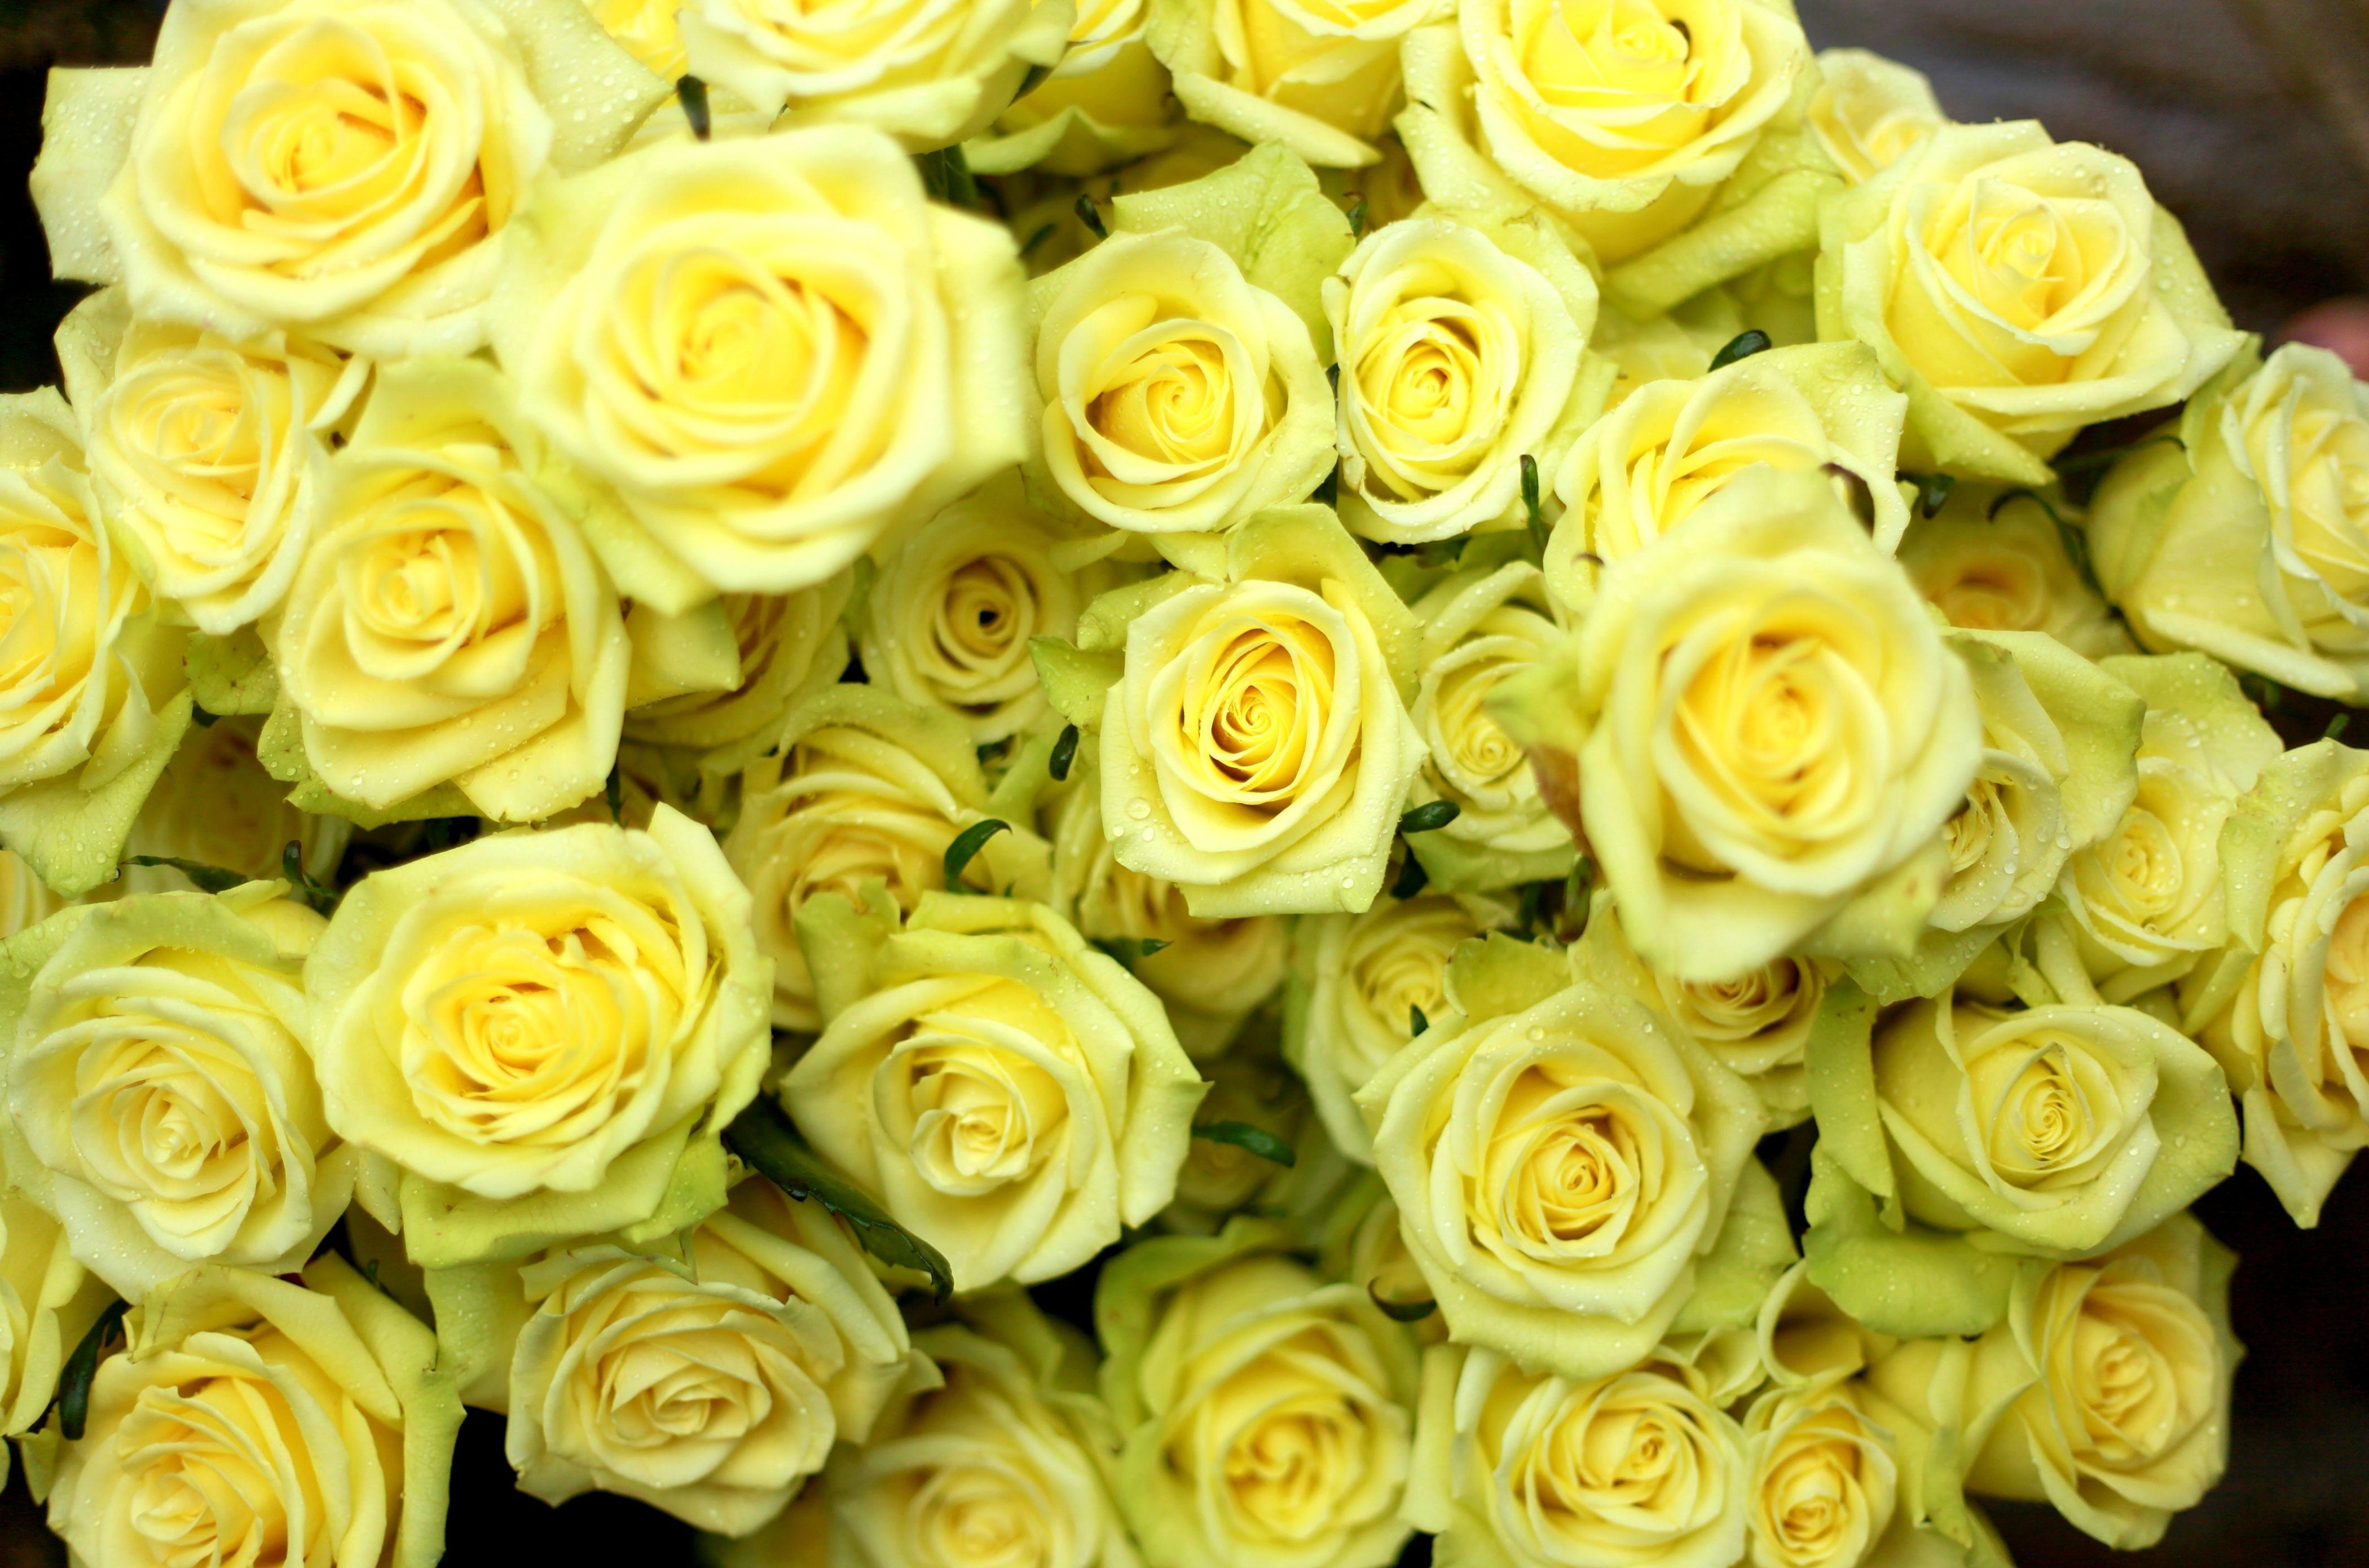 flowers, roses, drops, yellow, wet, bouquet